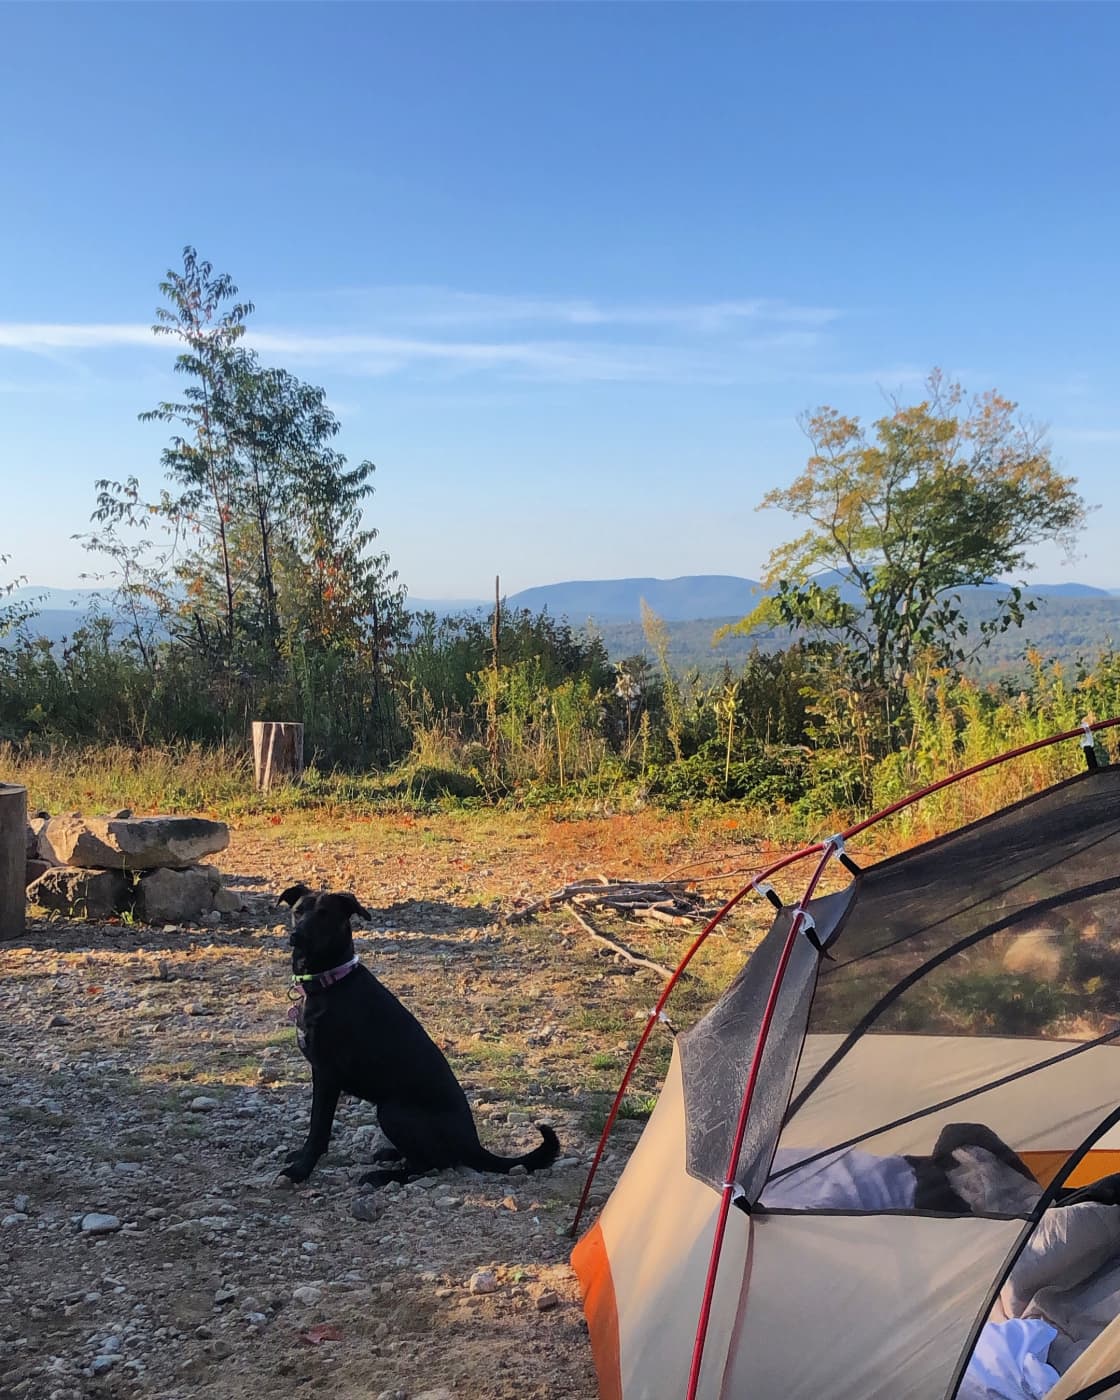 Site #5 (it stands for 5 starts)
4x4 is a must! (room for cars at site)
Flat sanded area for a tent
Fire pit and picnic table 
*very cute dog not included 